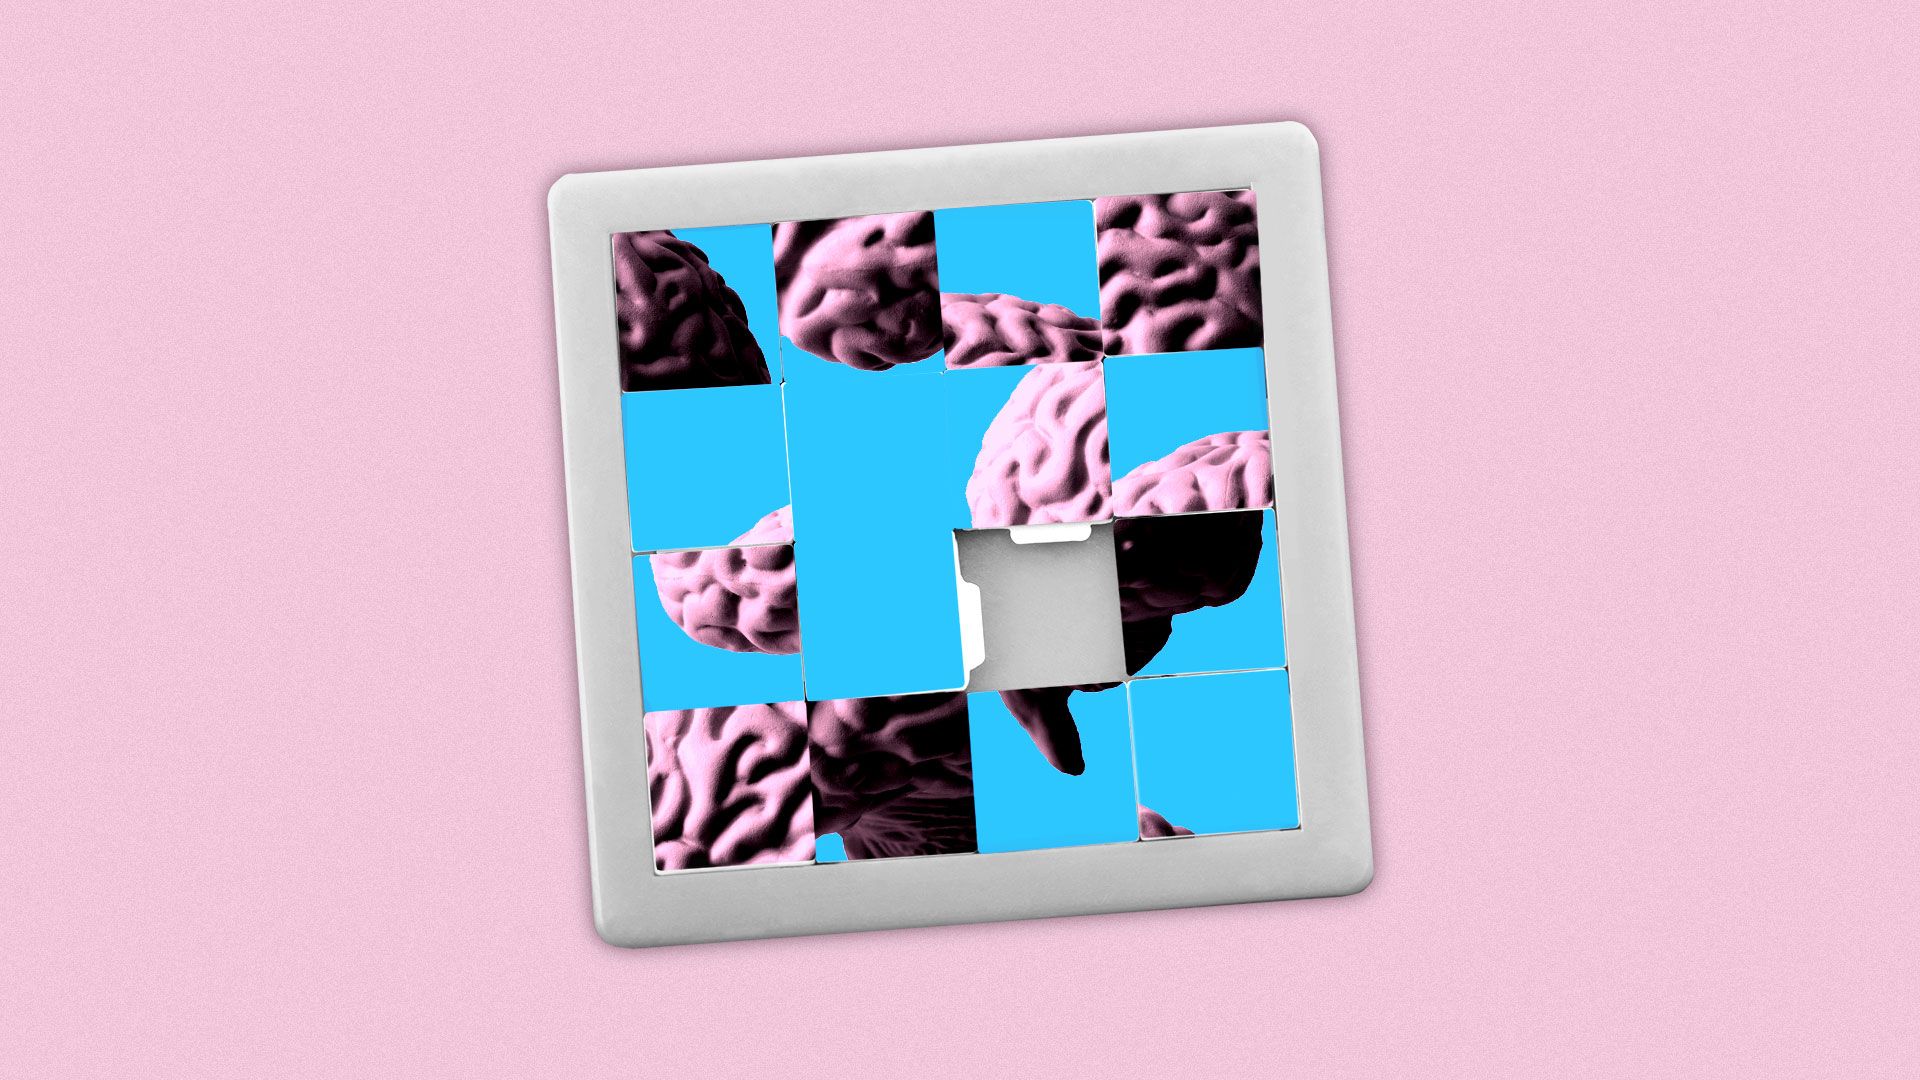 Illustration of a slide puzzle with an image of a brain all mixed up.